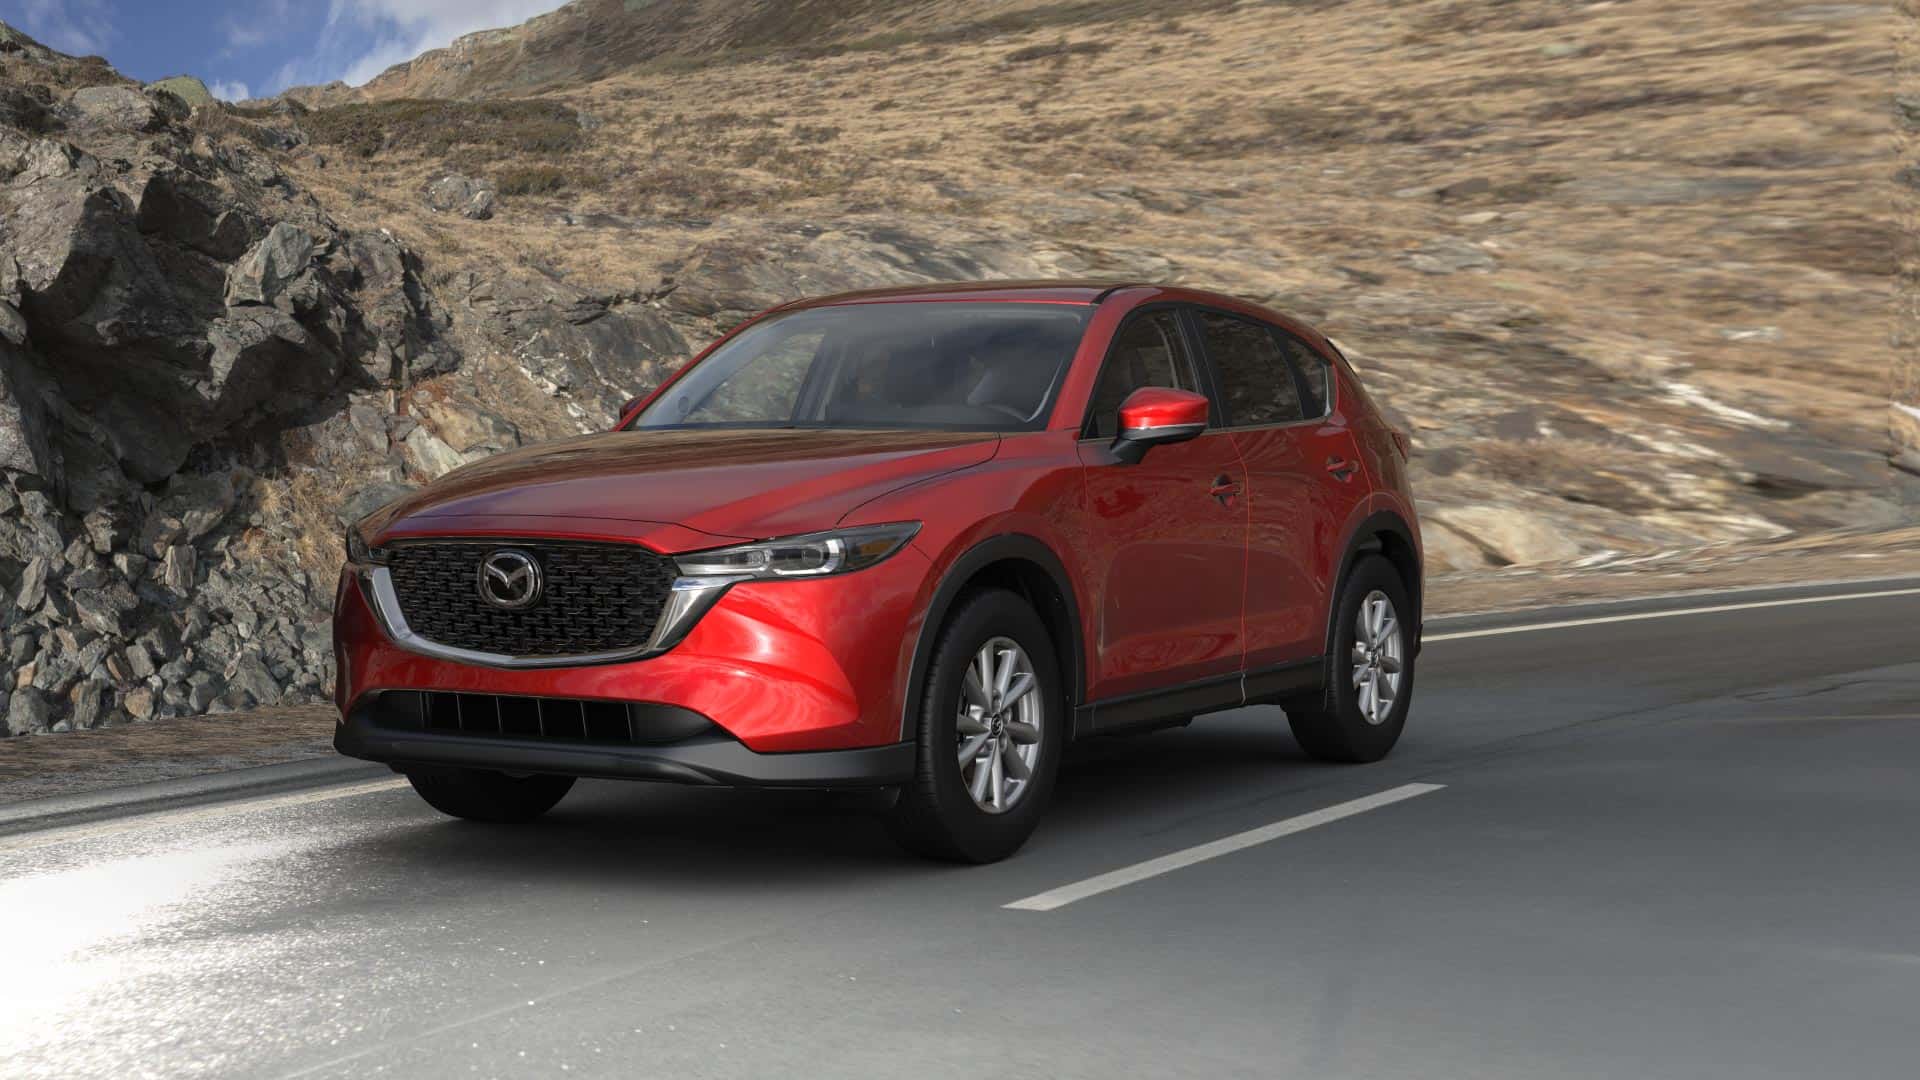 2023 Mazda CX-5 2.5 S Select Soul Red Crystal Metallic | Cook Mazda in Aberdeen MD